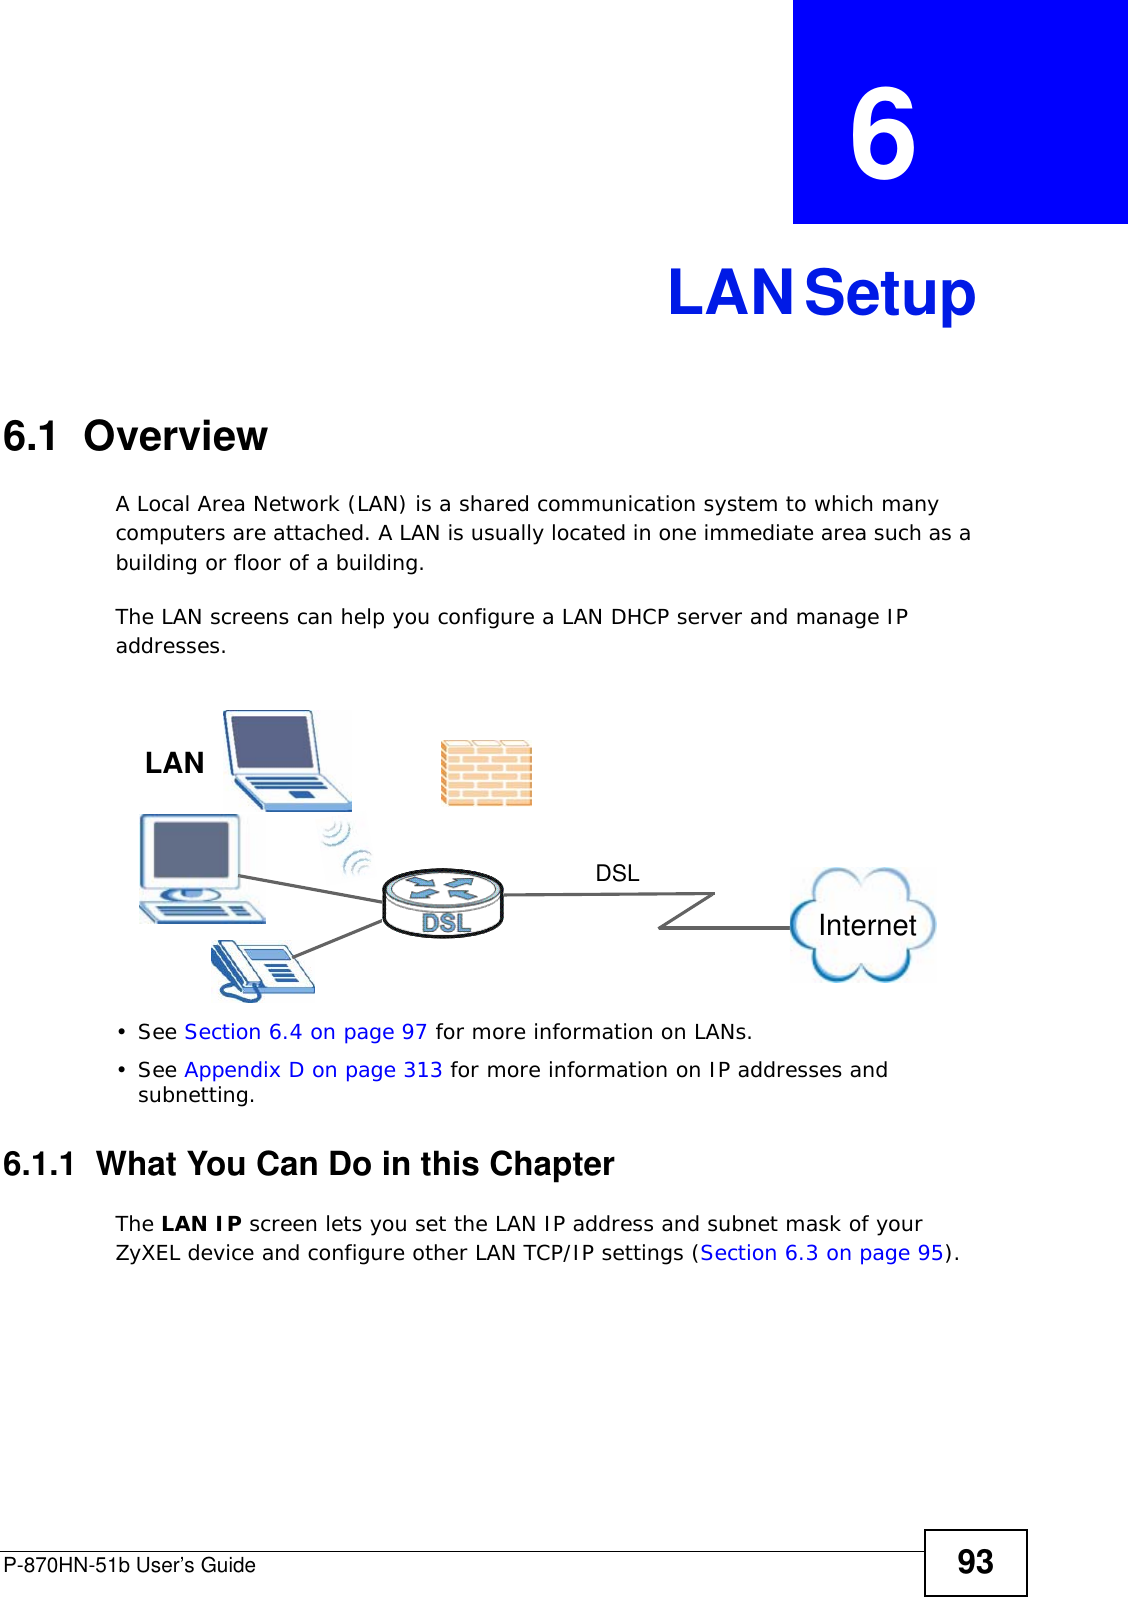 P-870HN-51b User’s Guide 93CHAPTER  6 LAN Setup6.1  Overview  A Local Area Network (LAN) is a shared communication system to which many computers are attached. A LAN is usually located in one immediate area such as a building or floor of a building.The LAN screens can help you configure a LAN DHCP server and manage IP addresses.• See Section 6.4 on page 97 for more information on LANs.• See Appendix D on page 313 for more information on IP addresses and subnetting.6.1.1  What You Can Do in this ChapterThe LAN IP screen lets you set the LAN IP address and subnet mask of your ZyXEL device and configure other LAN TCP/IP settings (Section 6.3 on page 95).InternetDSLLAN